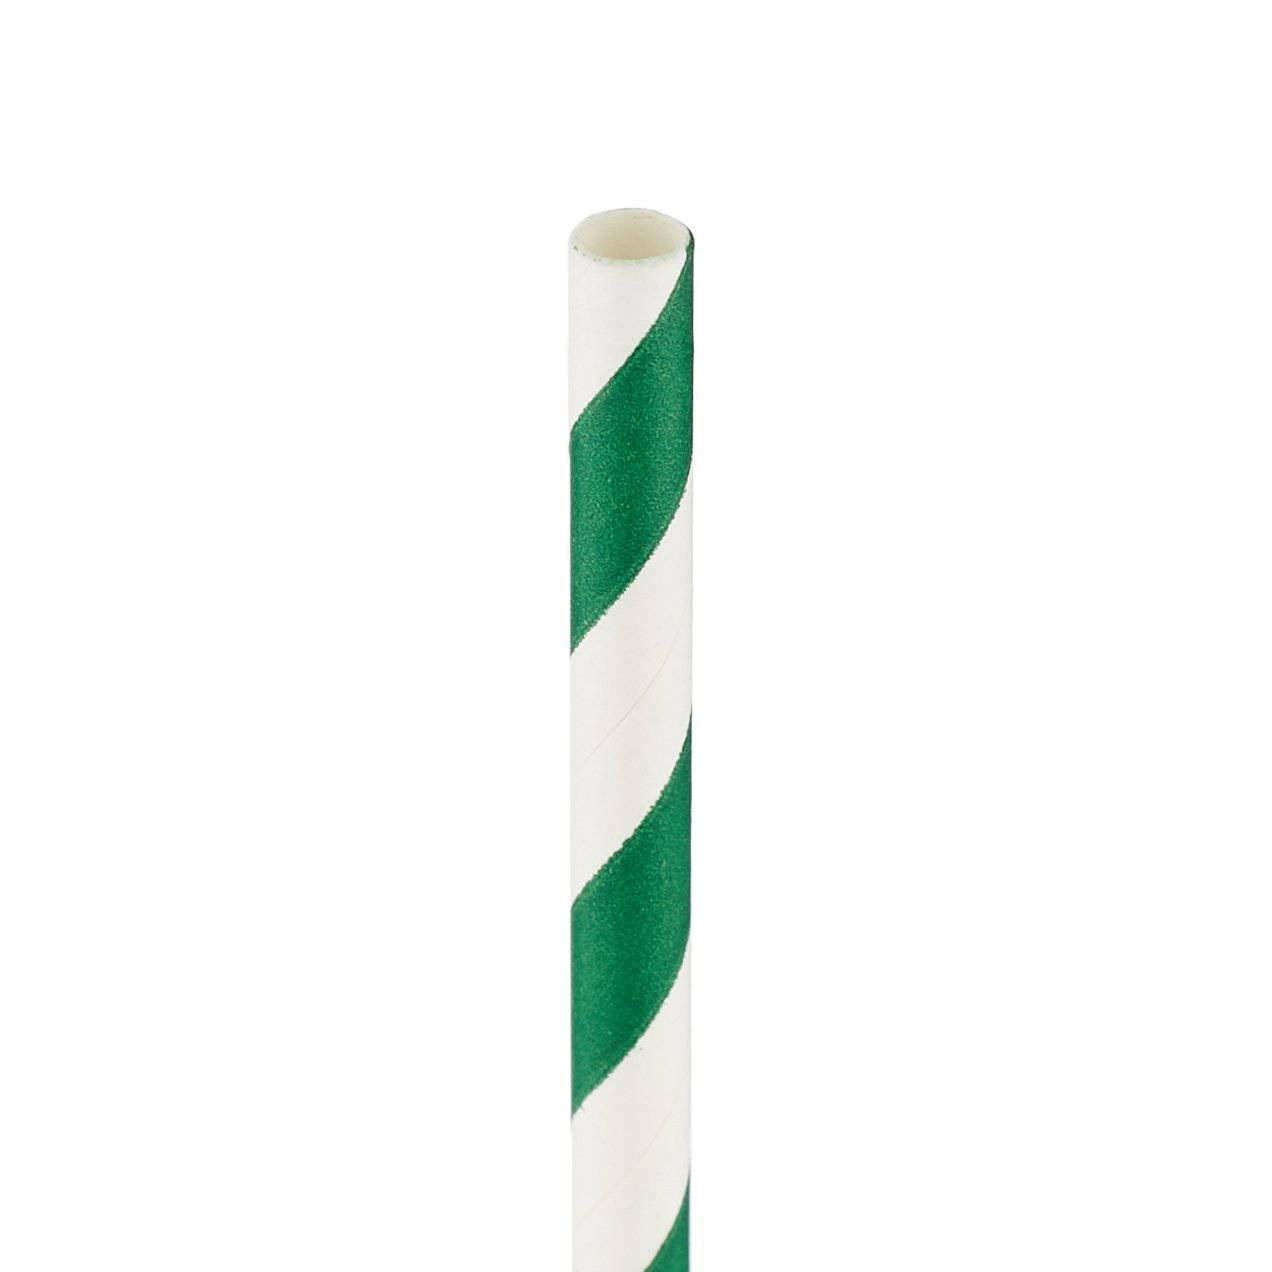 6 mm PAPER STRAW GREEN 5000 Pieces - Hotpack Oman